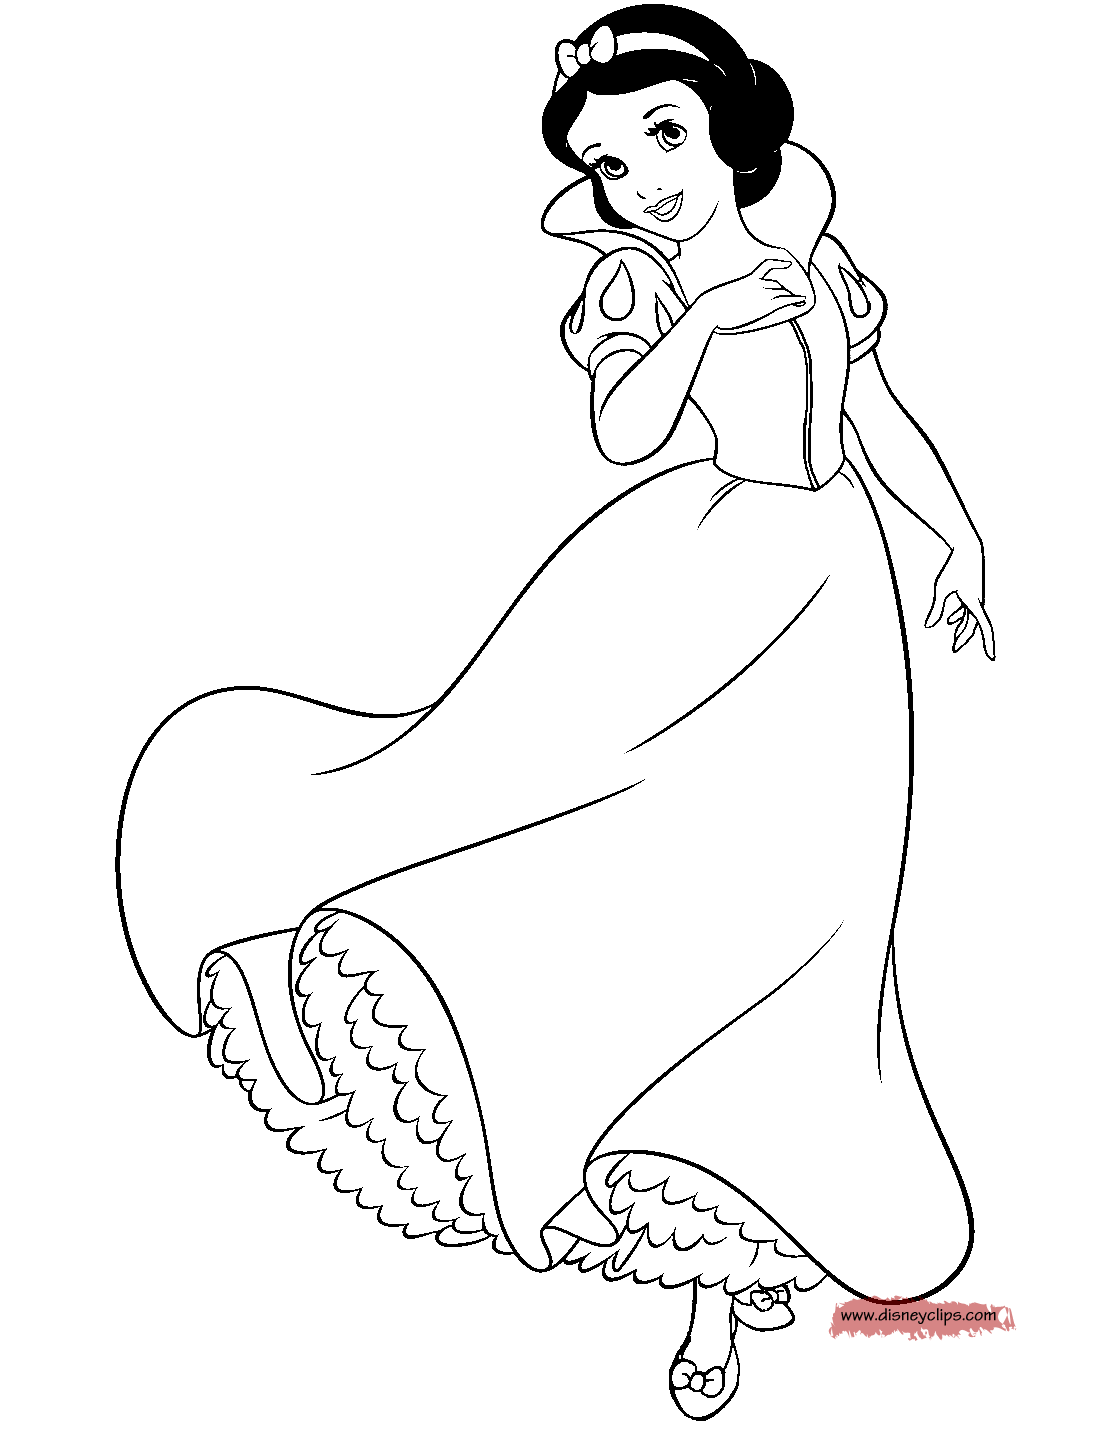 Snow White Coloring Pages For Kids Coloring And Drawing